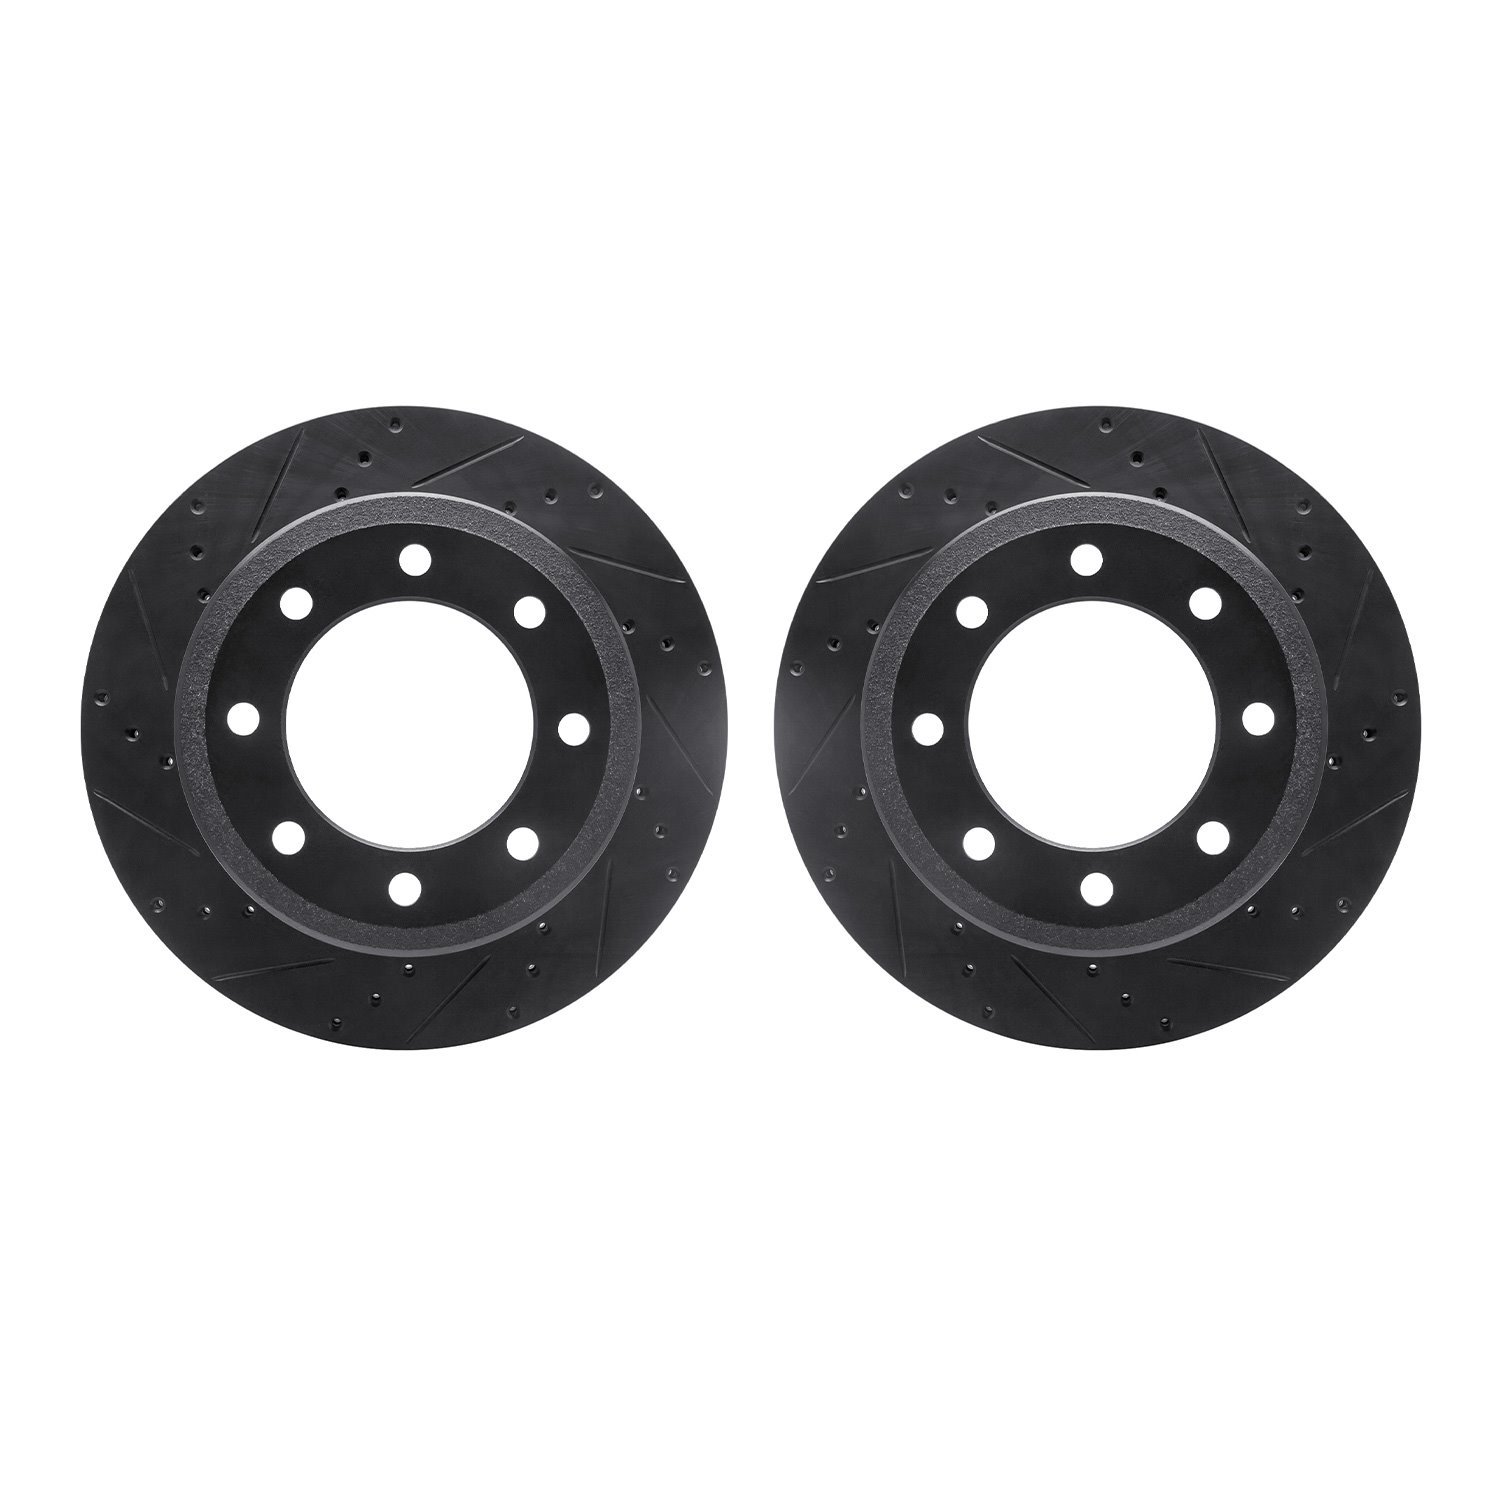 8002-54221 Drilled/Slotted Brake Rotors [Black], Fits Select Ford/Lincoln/Mercury/Mazda, Position: Rear